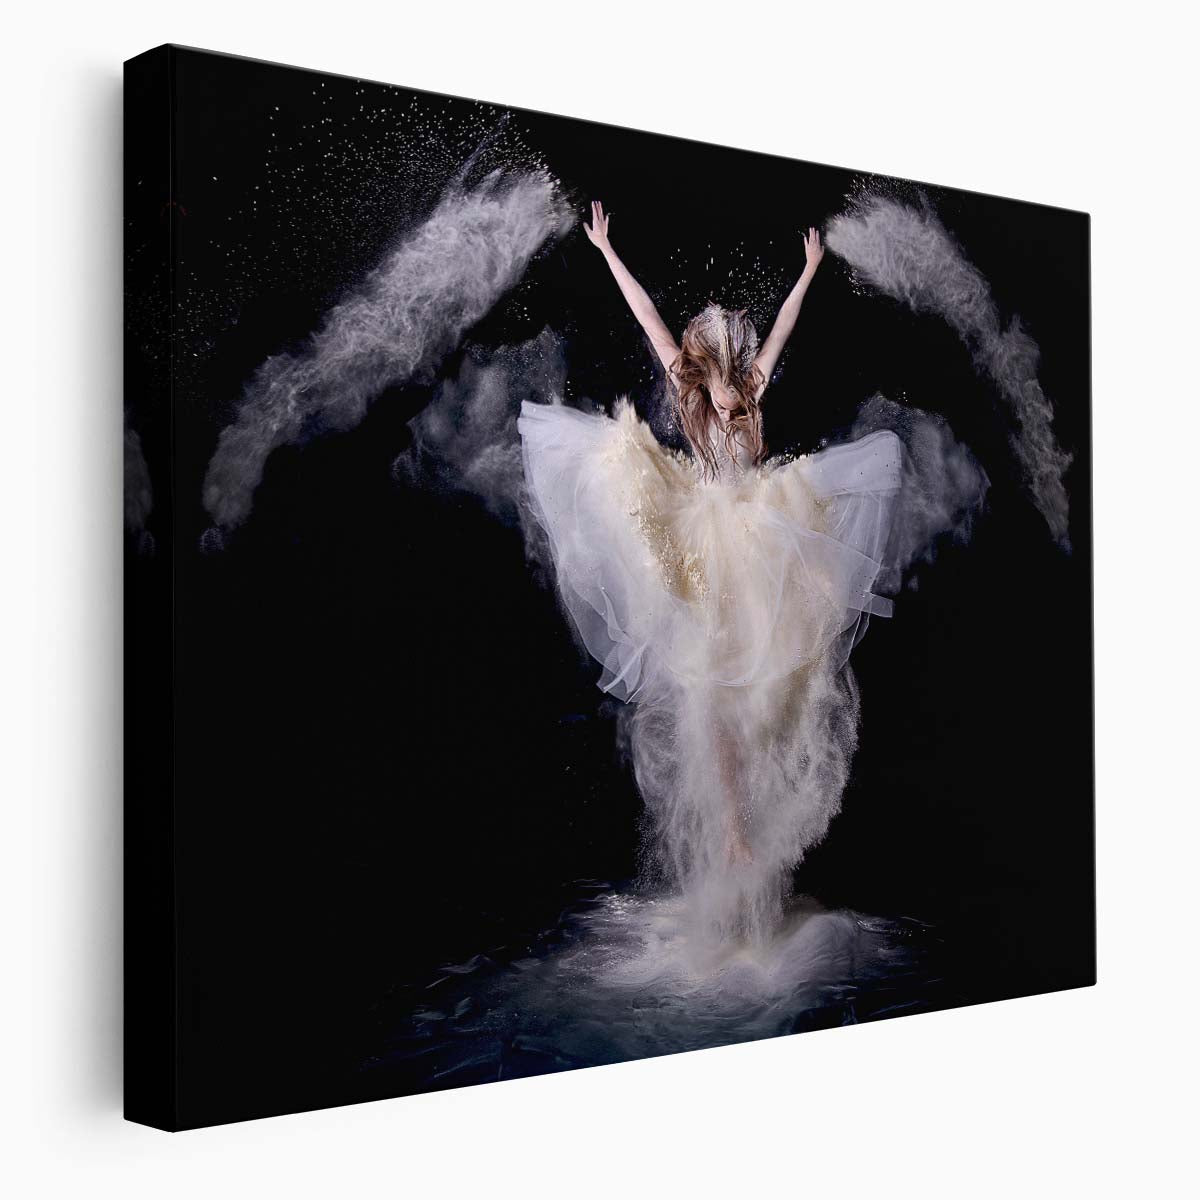 Dramatic Angelic Leap in Powder Wall Art by Luxuriance Designs. Made in USA.